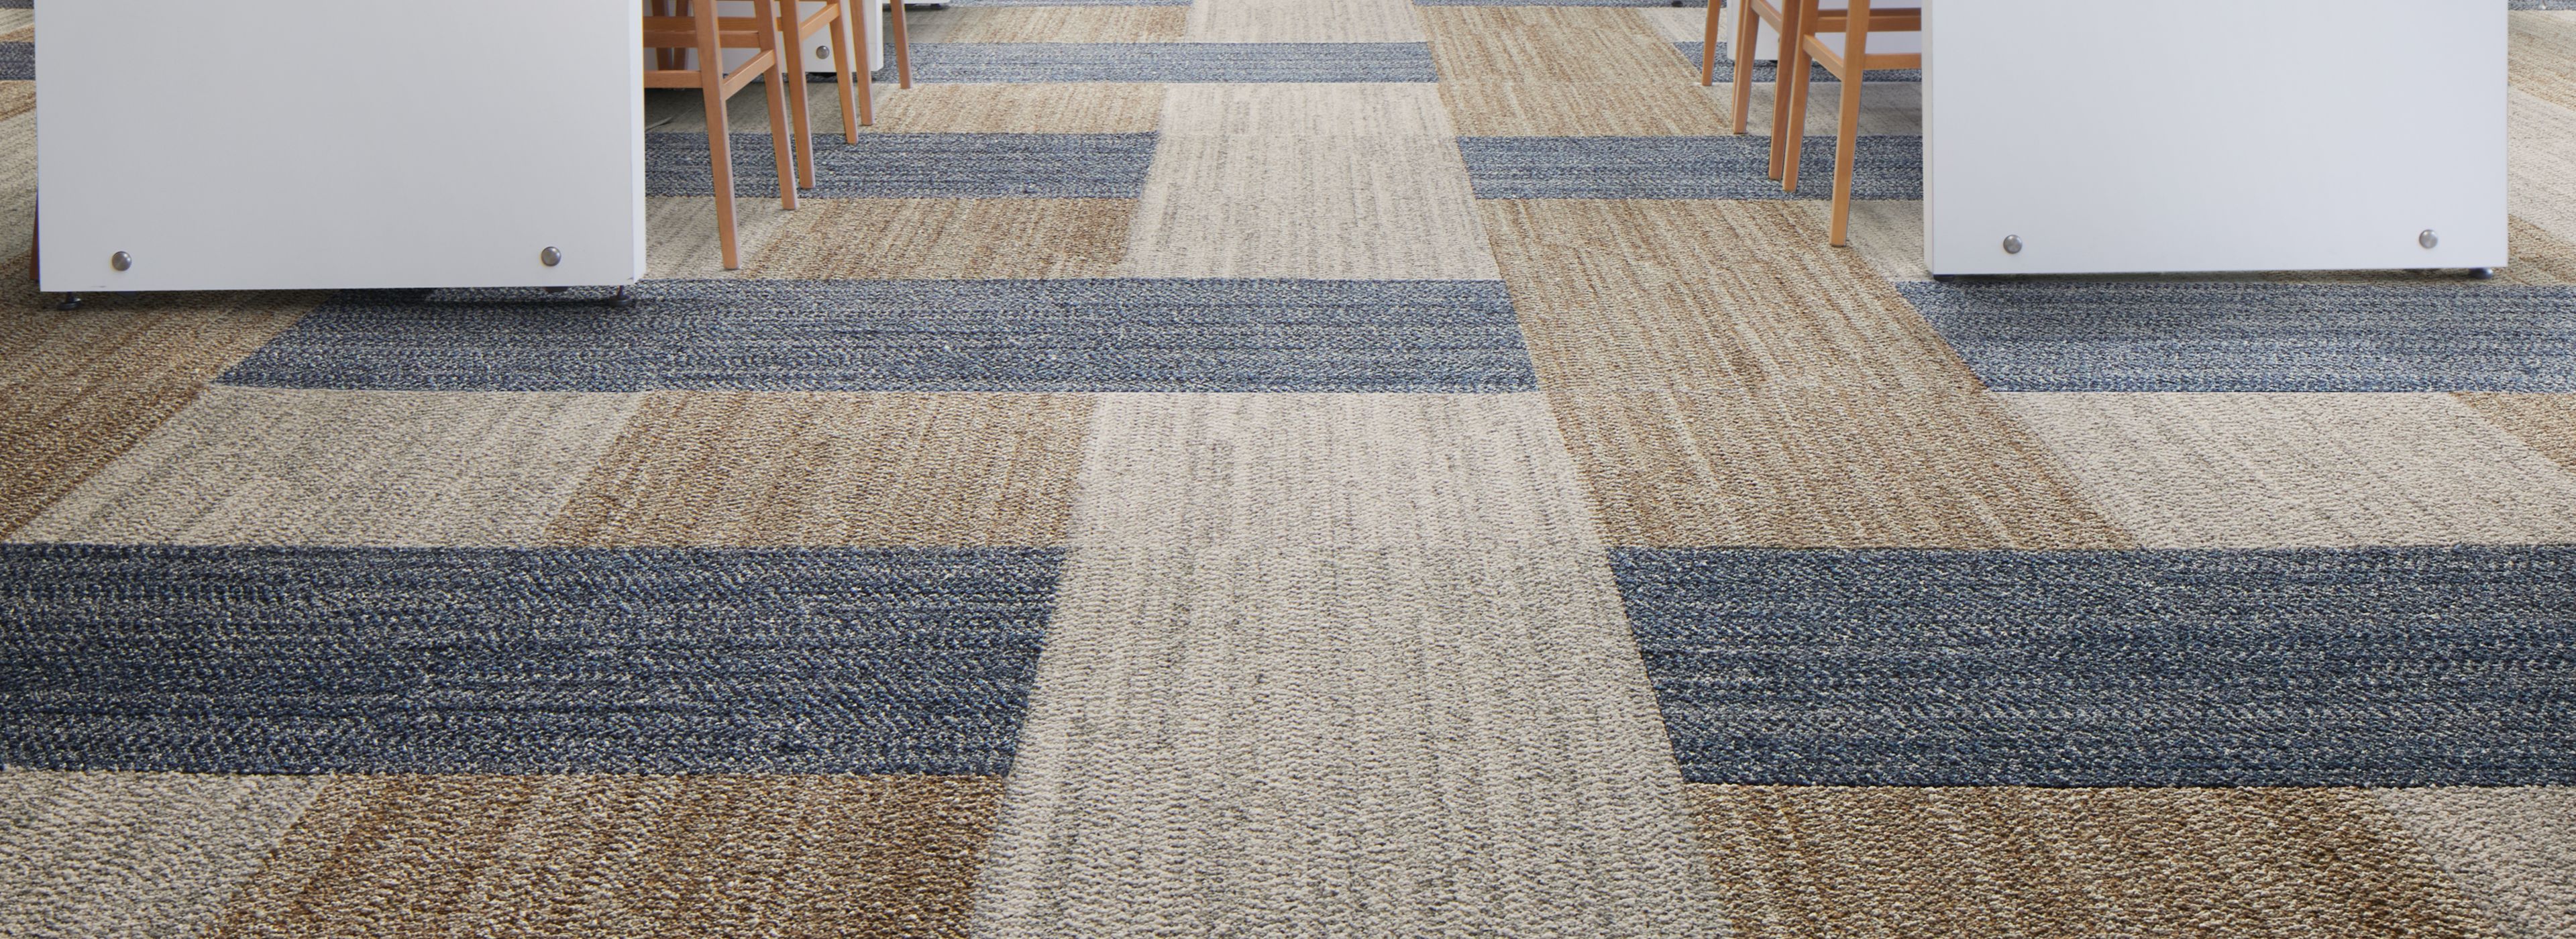 Interface Third Space 307 carpet tile in casual dining seating area imagen número 1